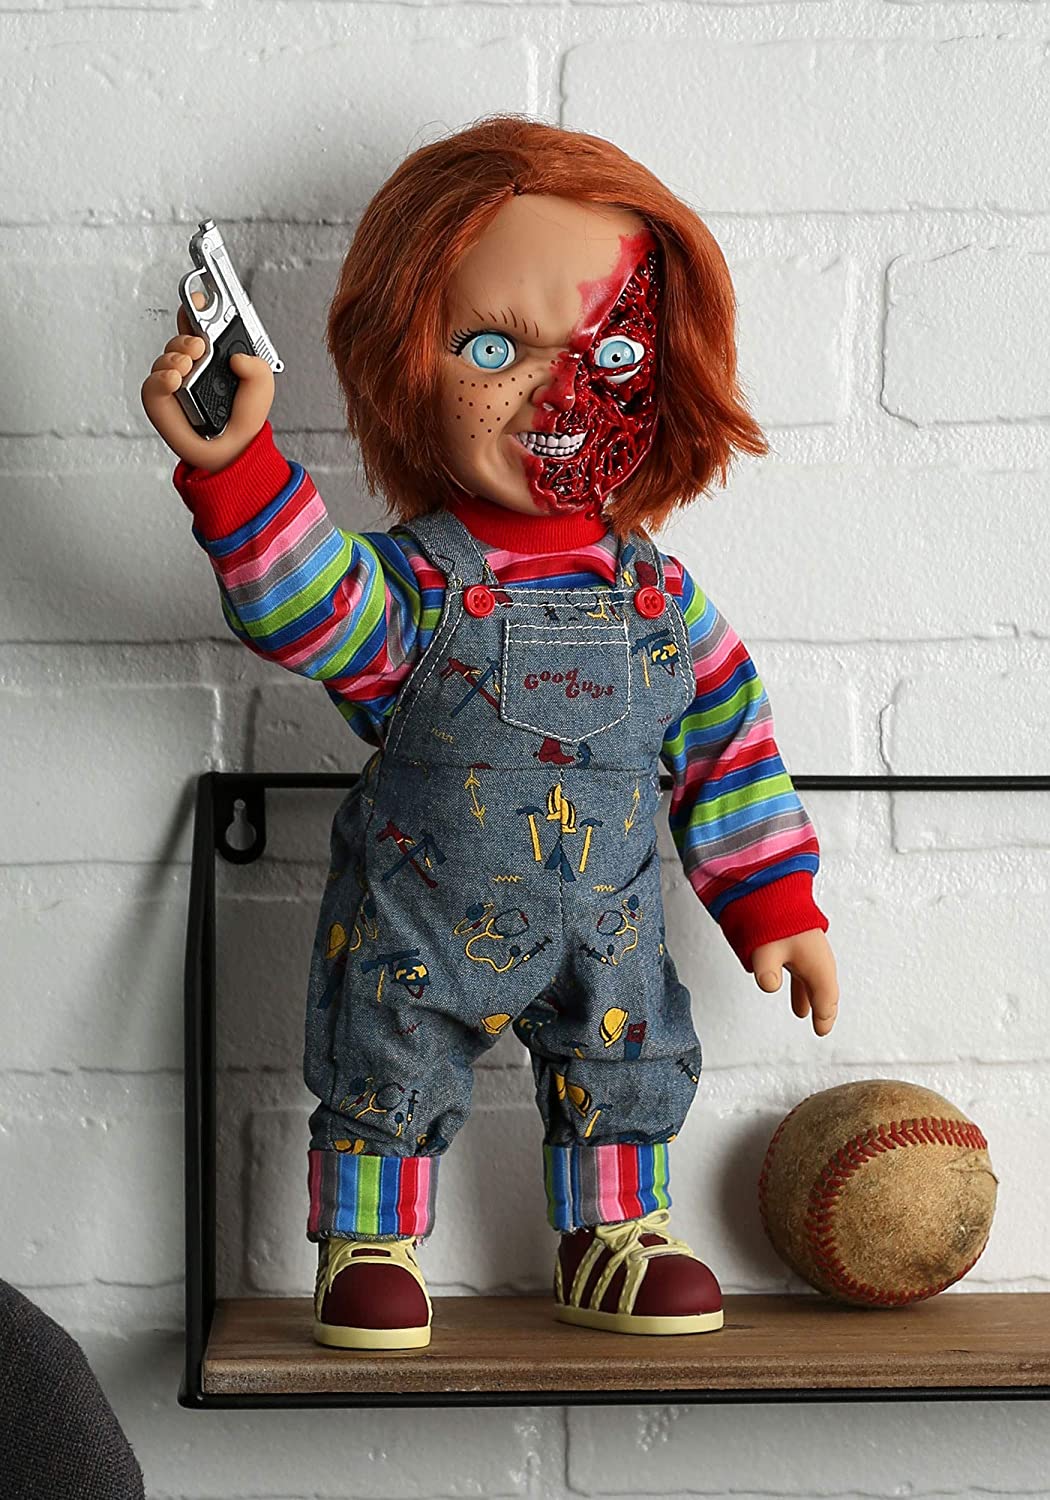 Mezco Childs Play 3: Chucky Talking Doll Pizza Face Version Standard